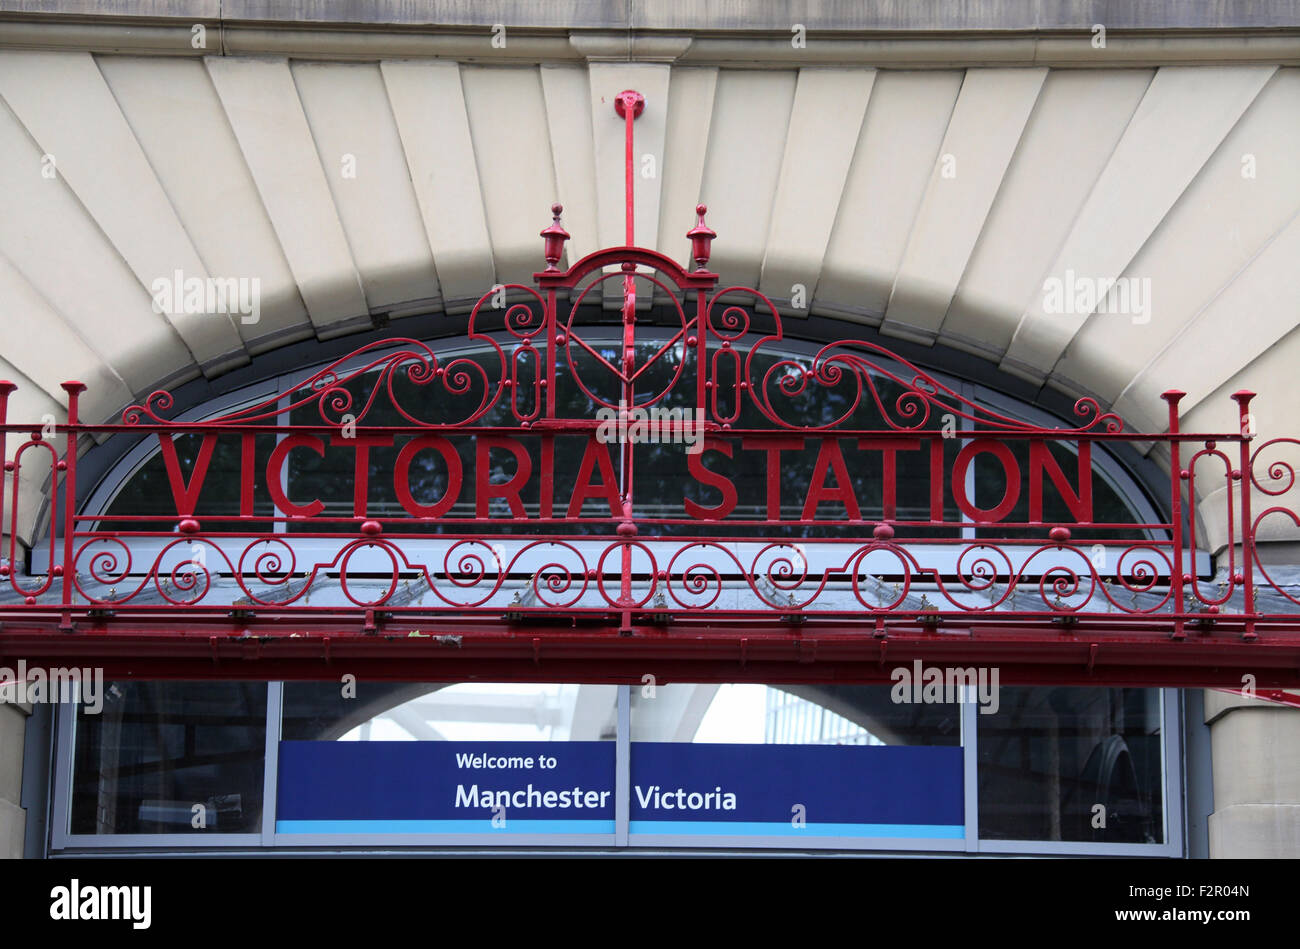 Manchester Victoria Station High Resolution Stock Photography and